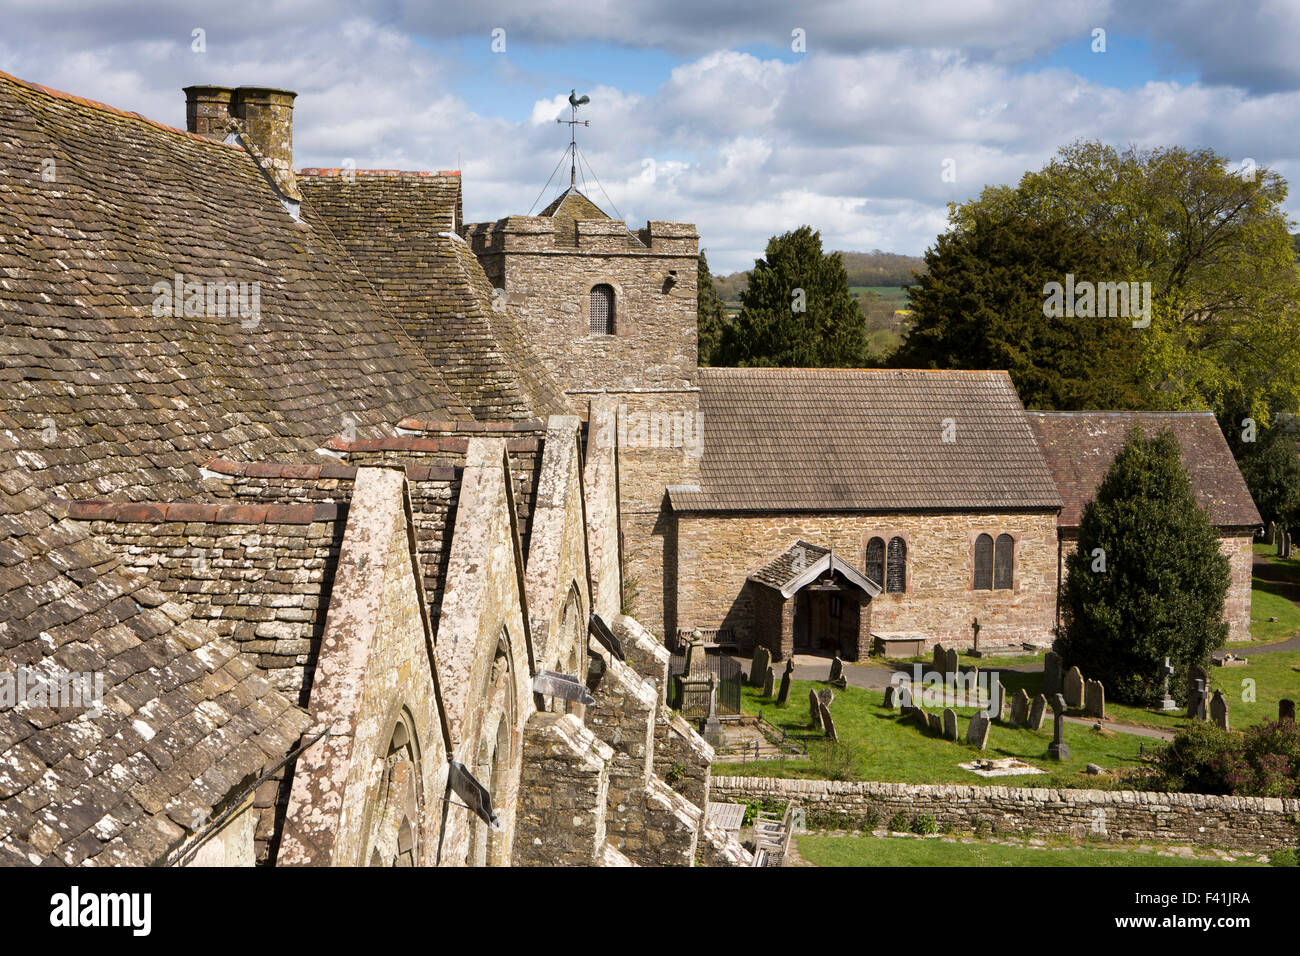 UK, England, Shropshire, Craven Arms, Stokesay Castle, elevated view of Great Hall roof and church Stock Photo